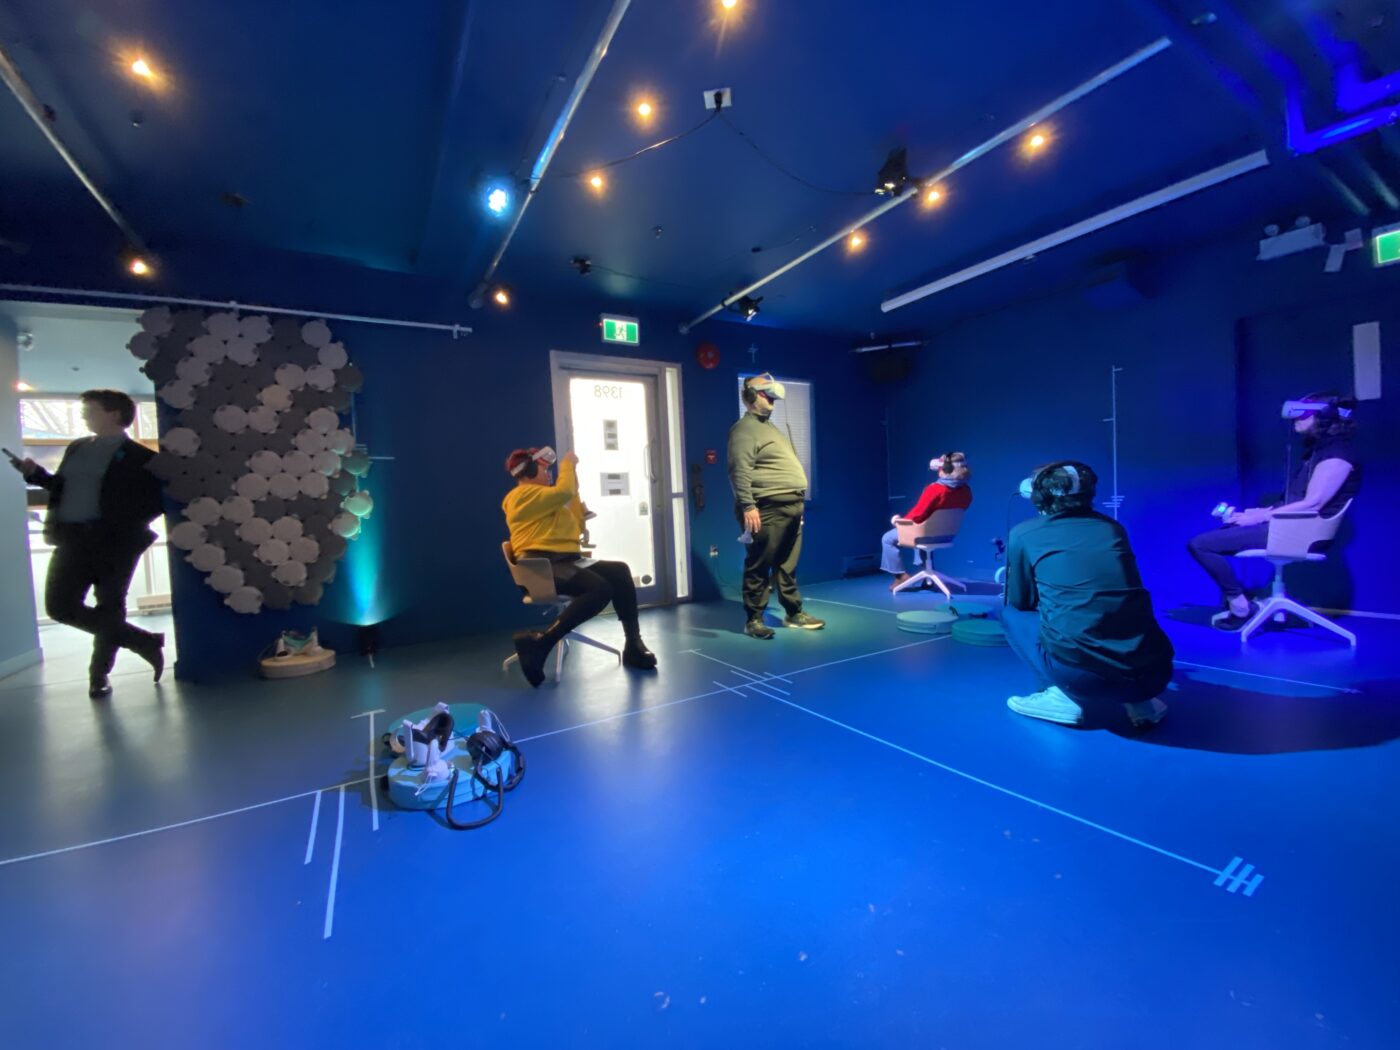 A group of 5 are in a blue room, some sitting, one standing, one kneeling, looking in different directions wearing VR headsets and controllers. Another figure leans against a door way, backlit.